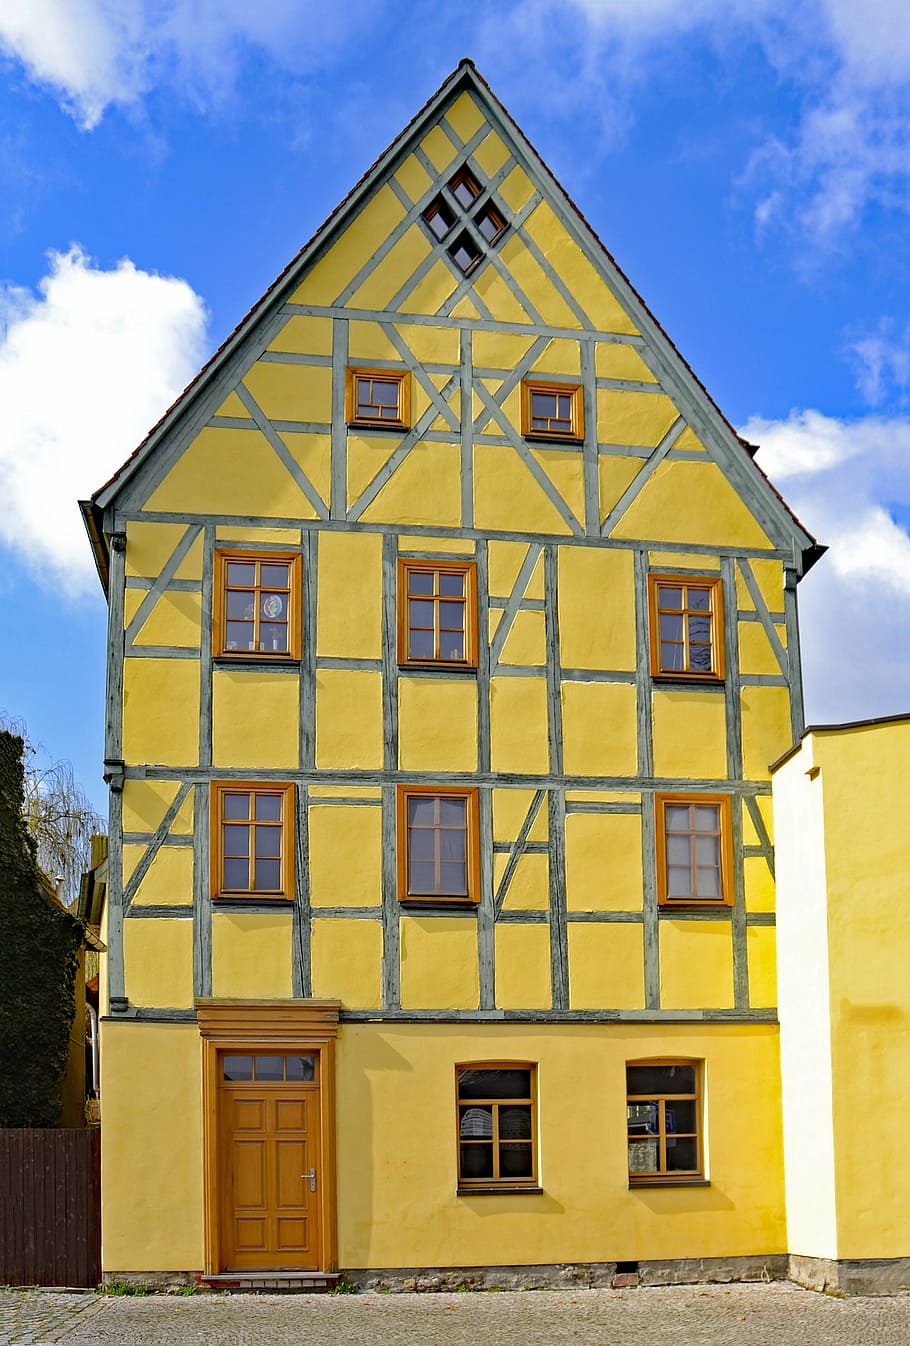 merseburg, saxony-anhalt, germany, old town, places of interest, fachwerkhaus, truss, architecture, house, building Exterior